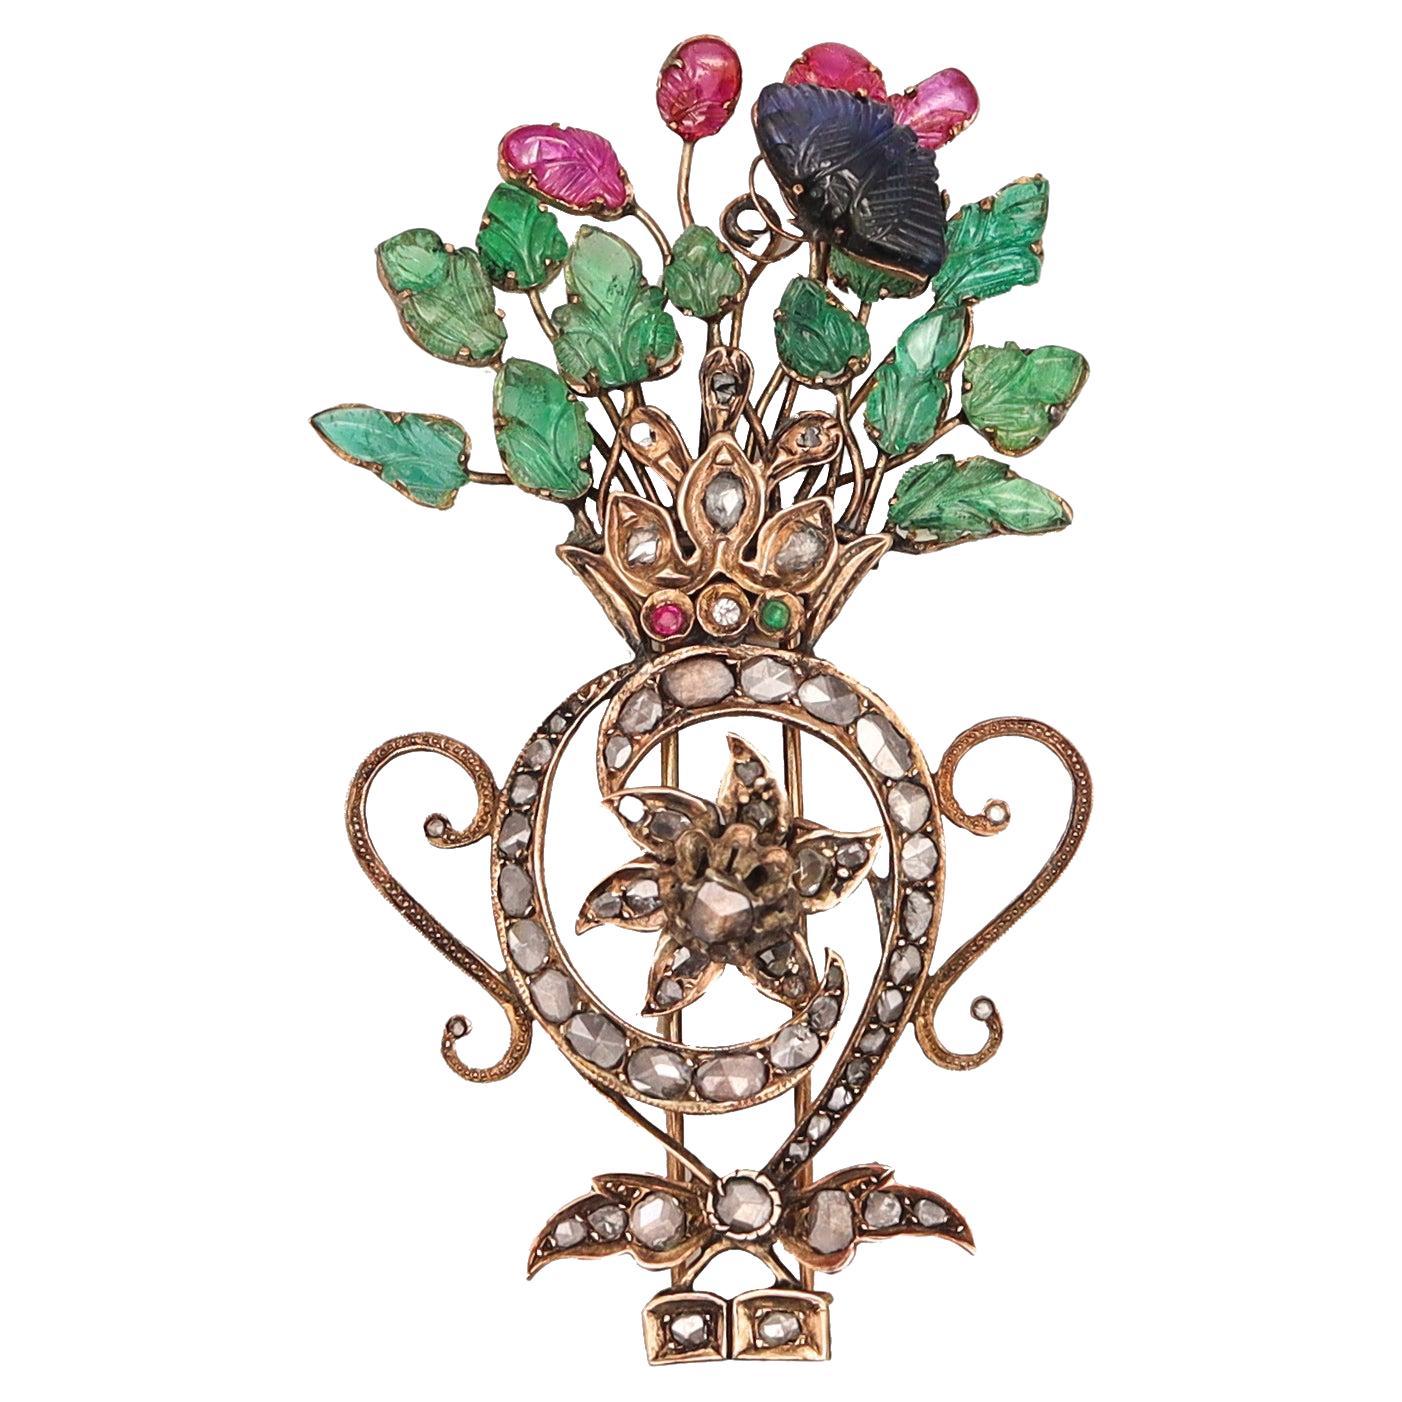 Victorian 1837 Mughal Tutti Frutti Brooch In 17Kt Gold With Carved Gemstones For Sale